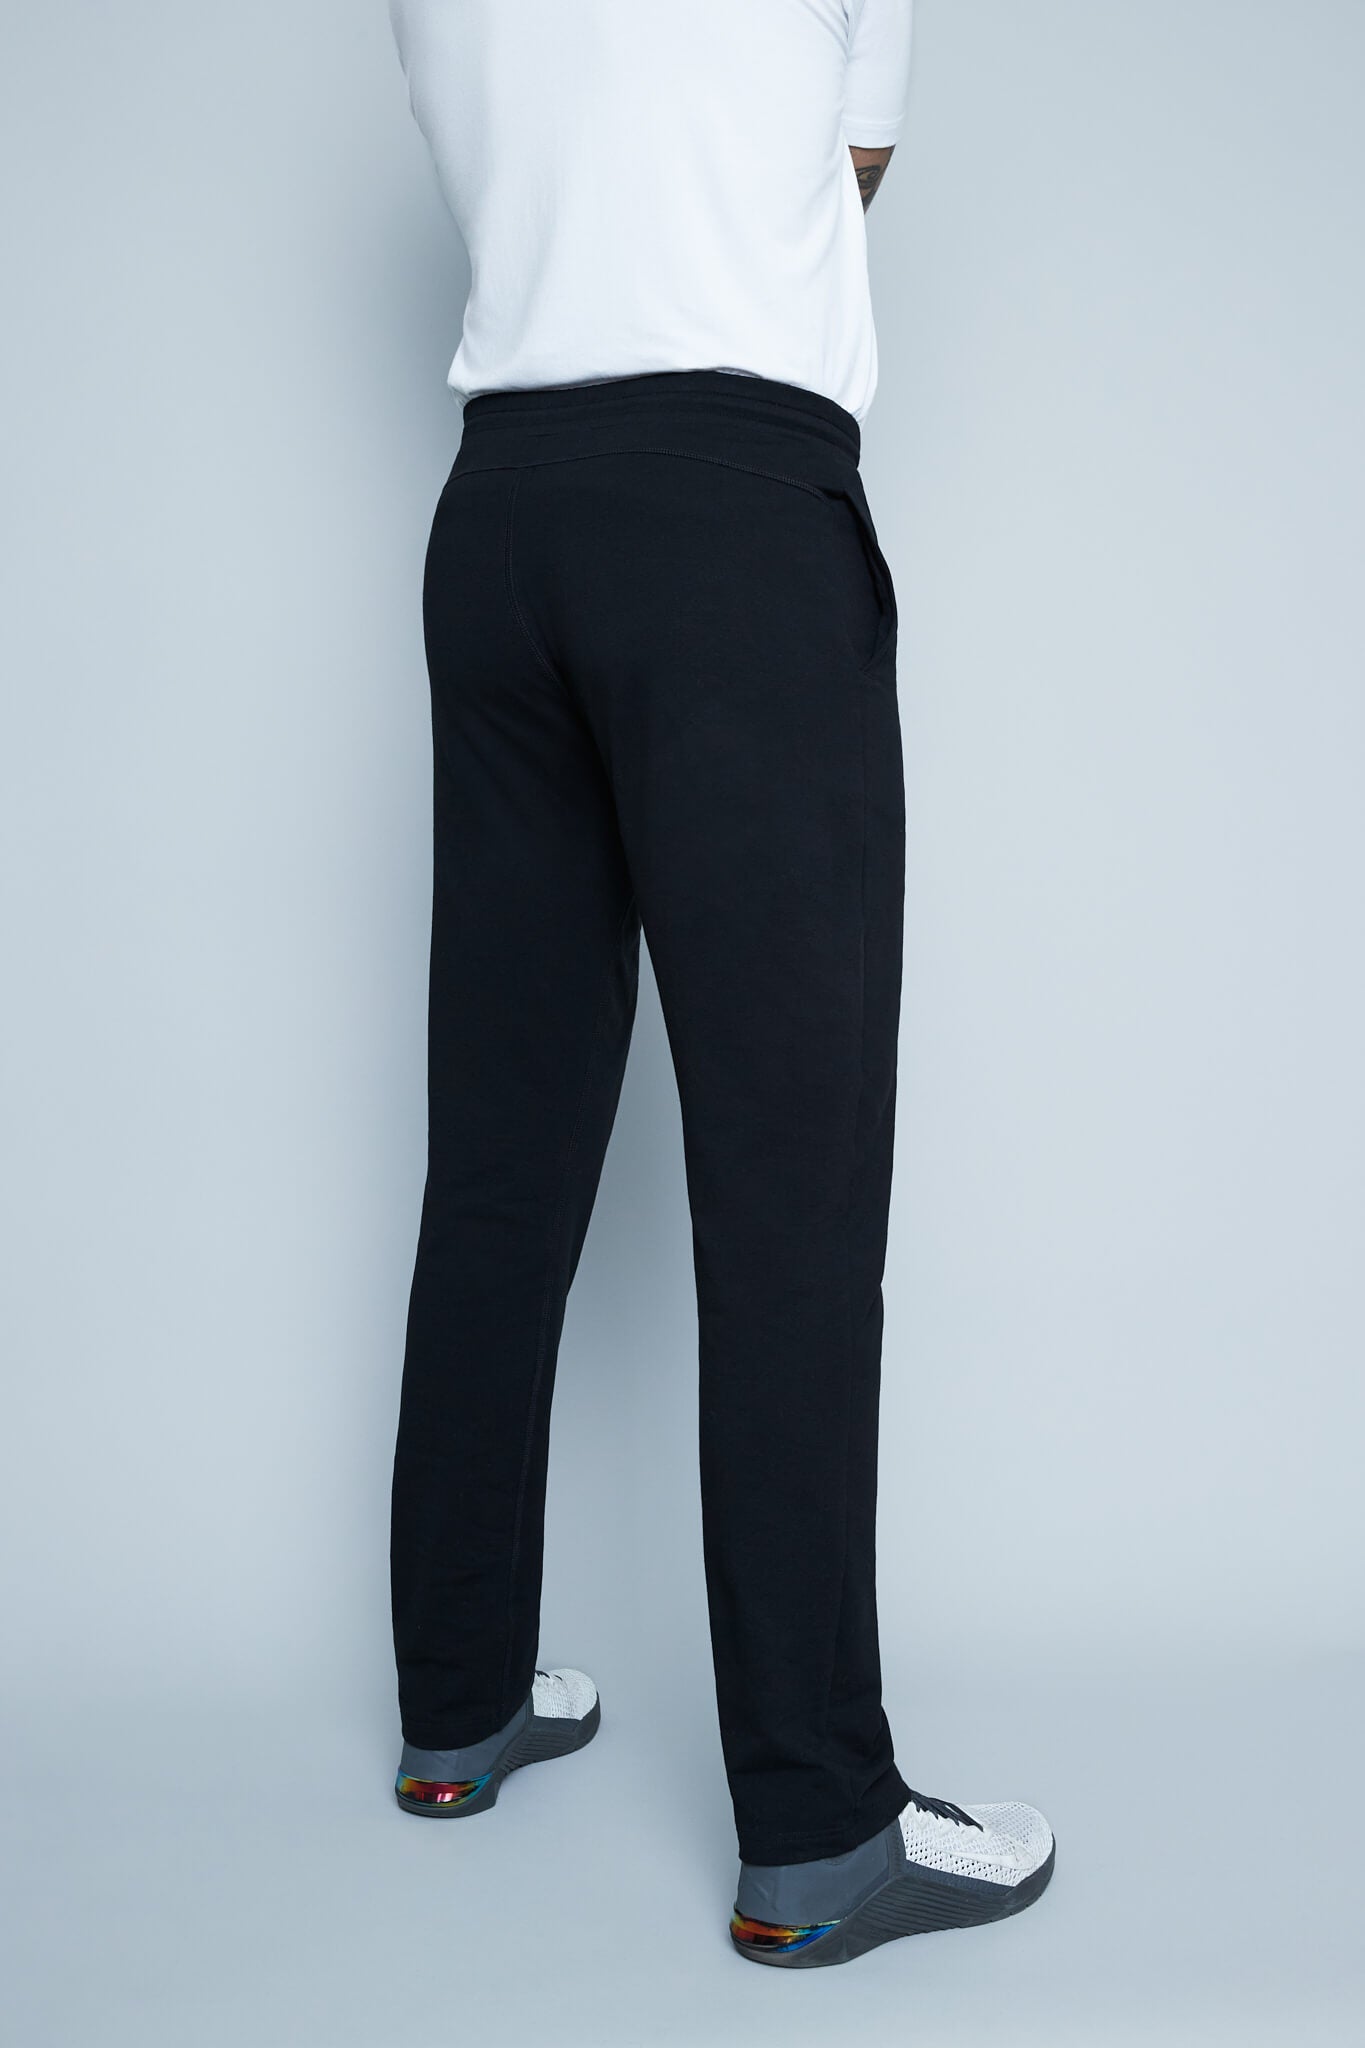 Mens tall pants in black by Navas Lab. The perfect mens tall sweatpants for tall mens looking for style and comfort.